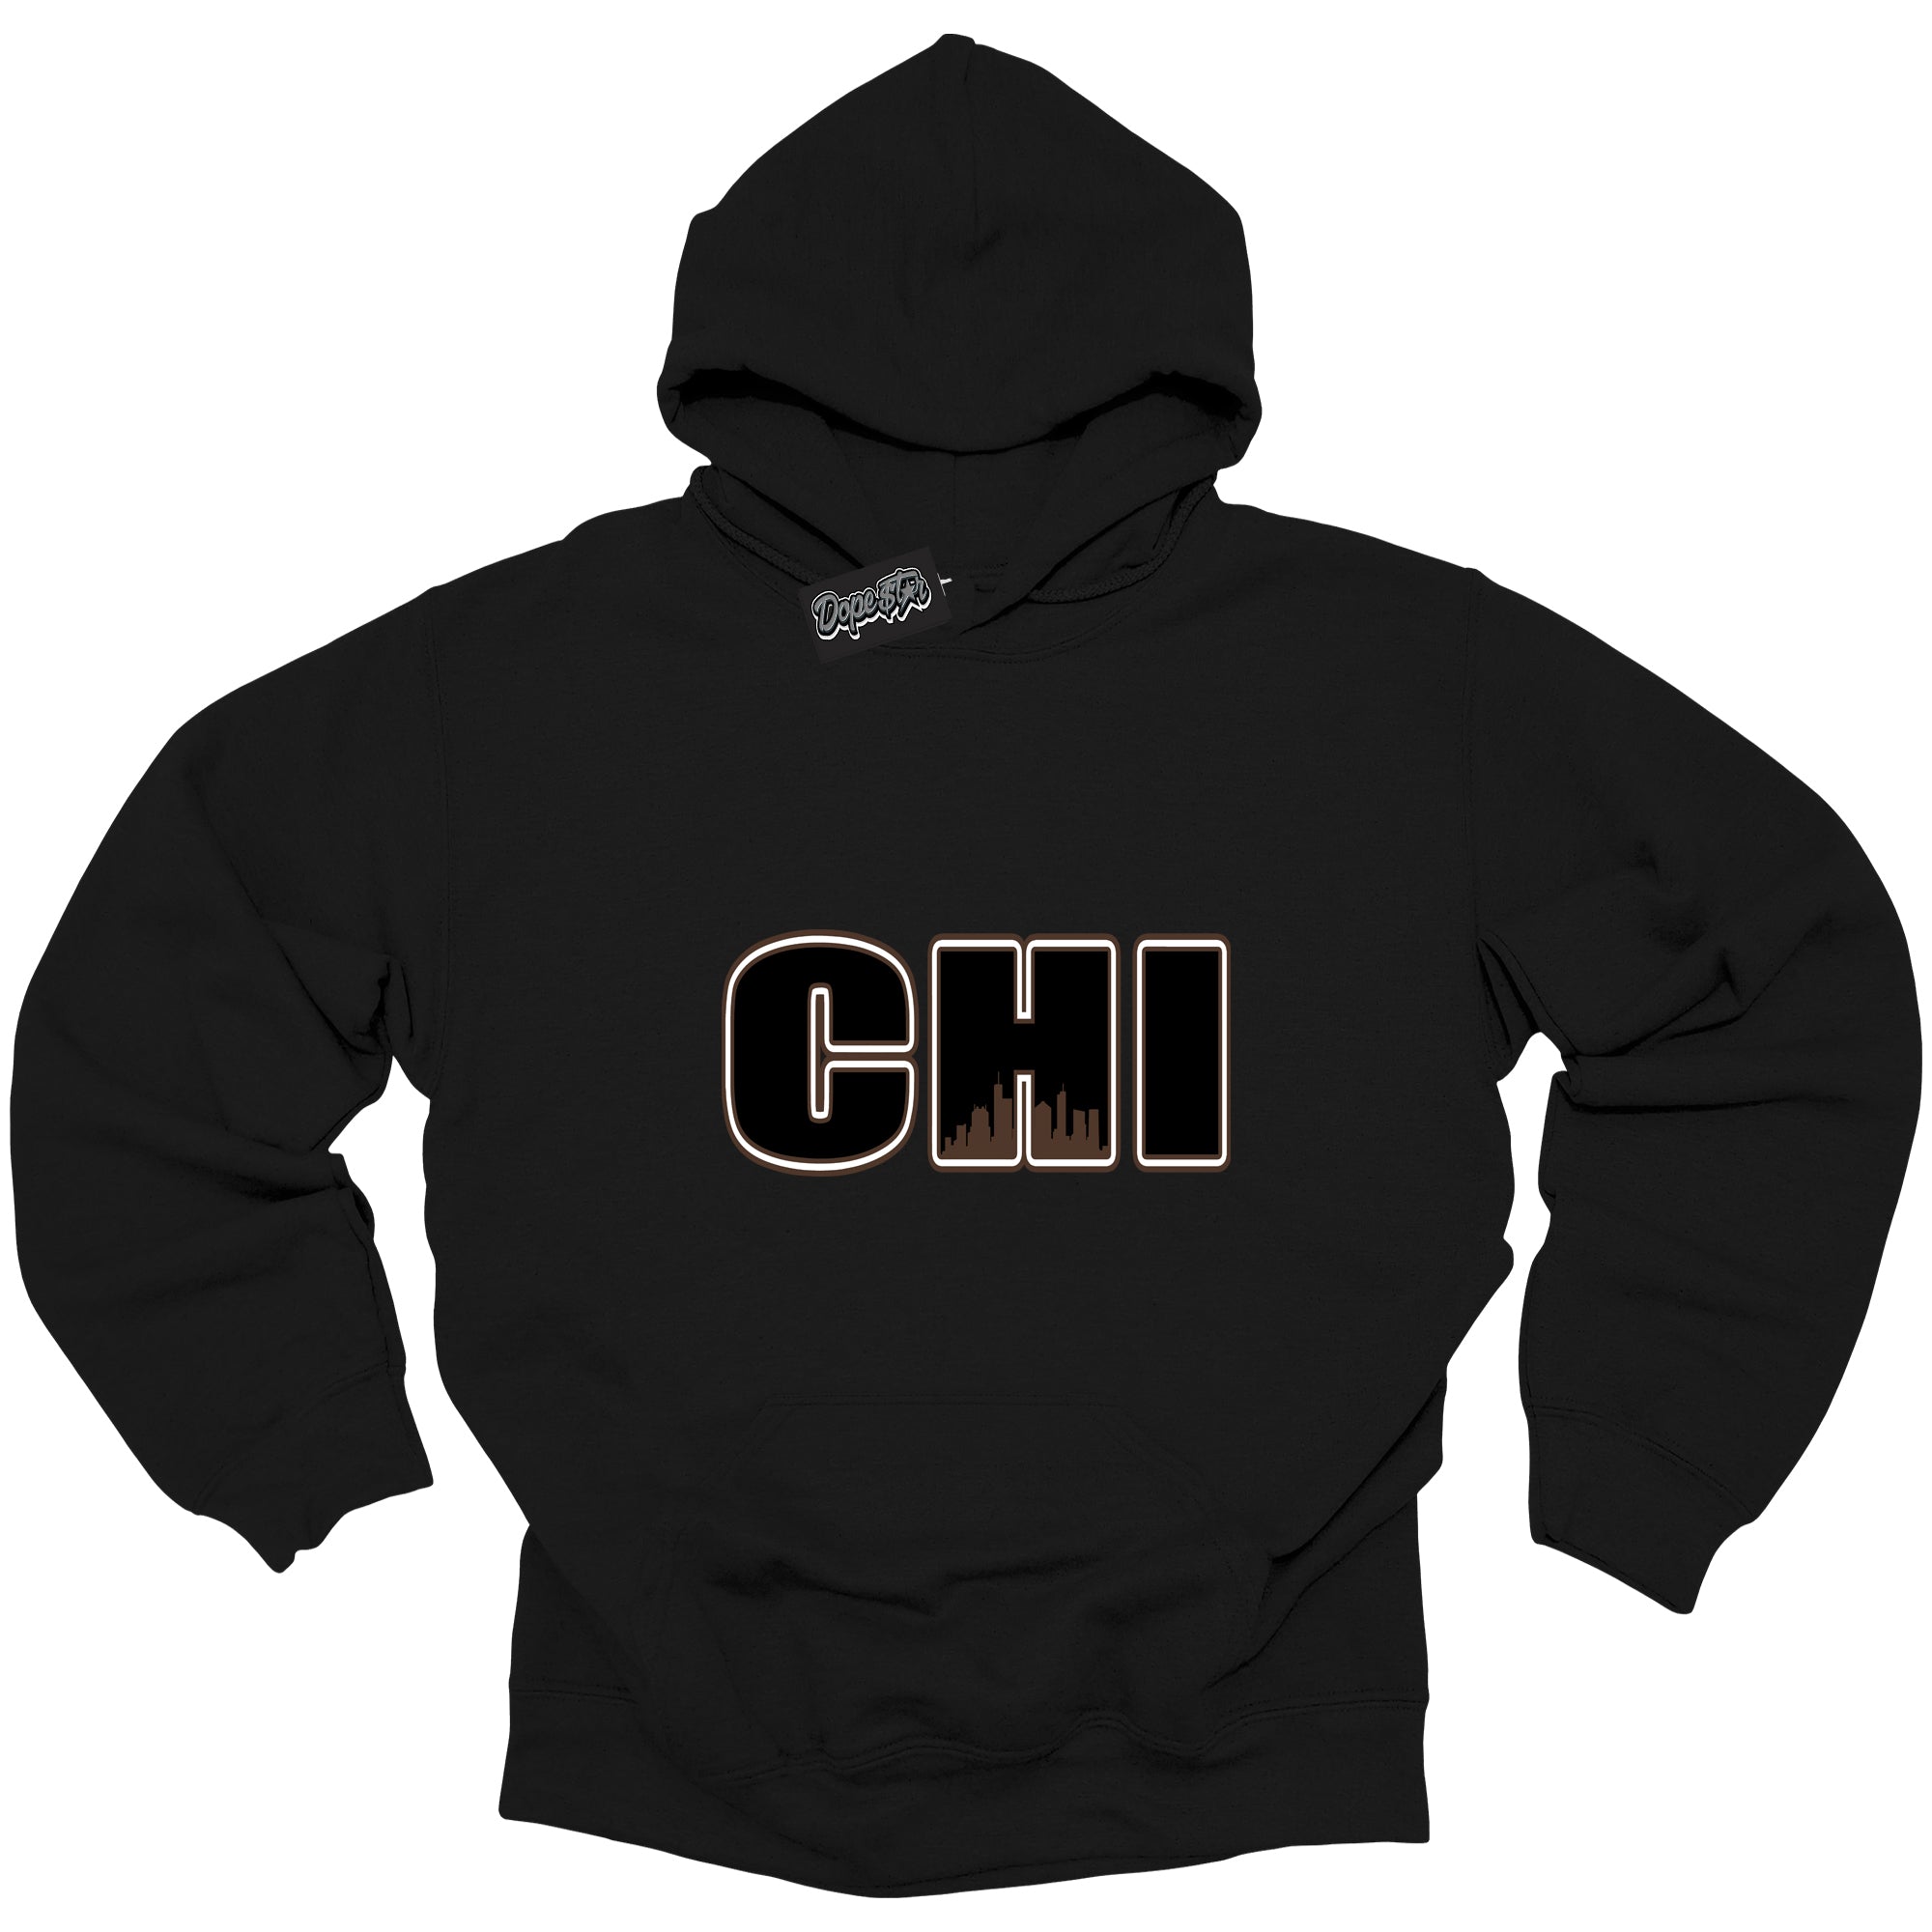 Cool Black Graphic DopeStar Hoodie with “ Chicago “ print, that perfectly matches Palomino 1s sneakers